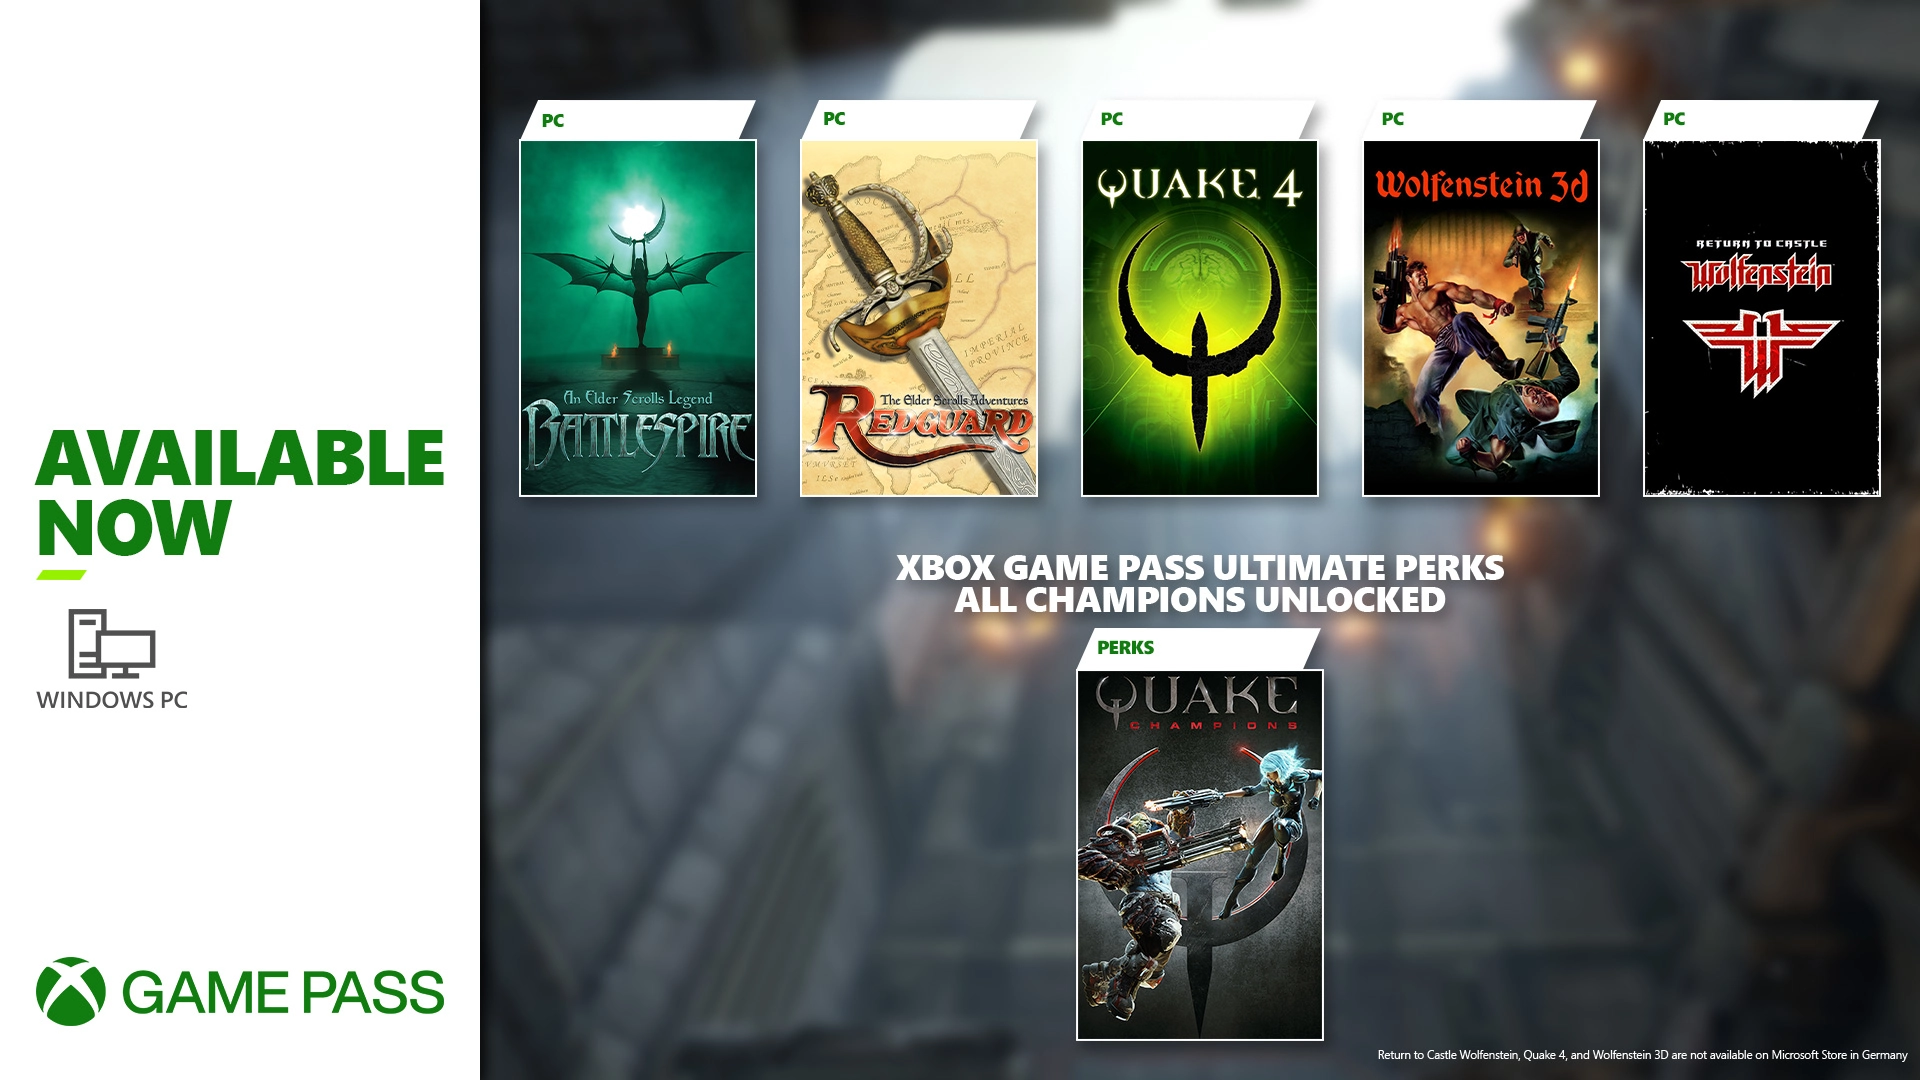 Poster art for Elder Scrolls, Quake, and Wolfenstein games available on Xbox Game Pass for PC